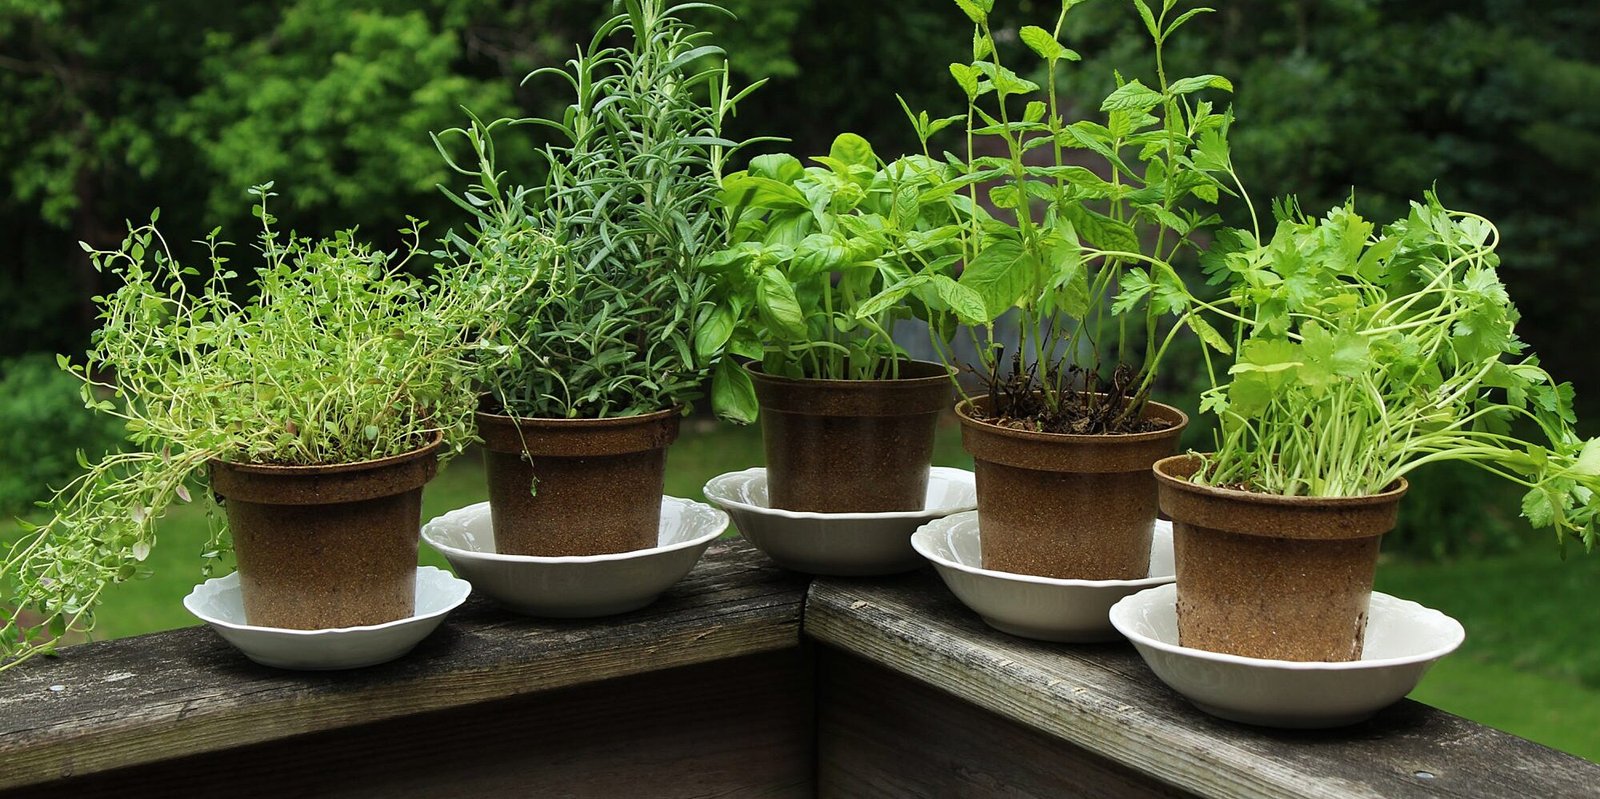 4 responsive herbs to fend off diseases